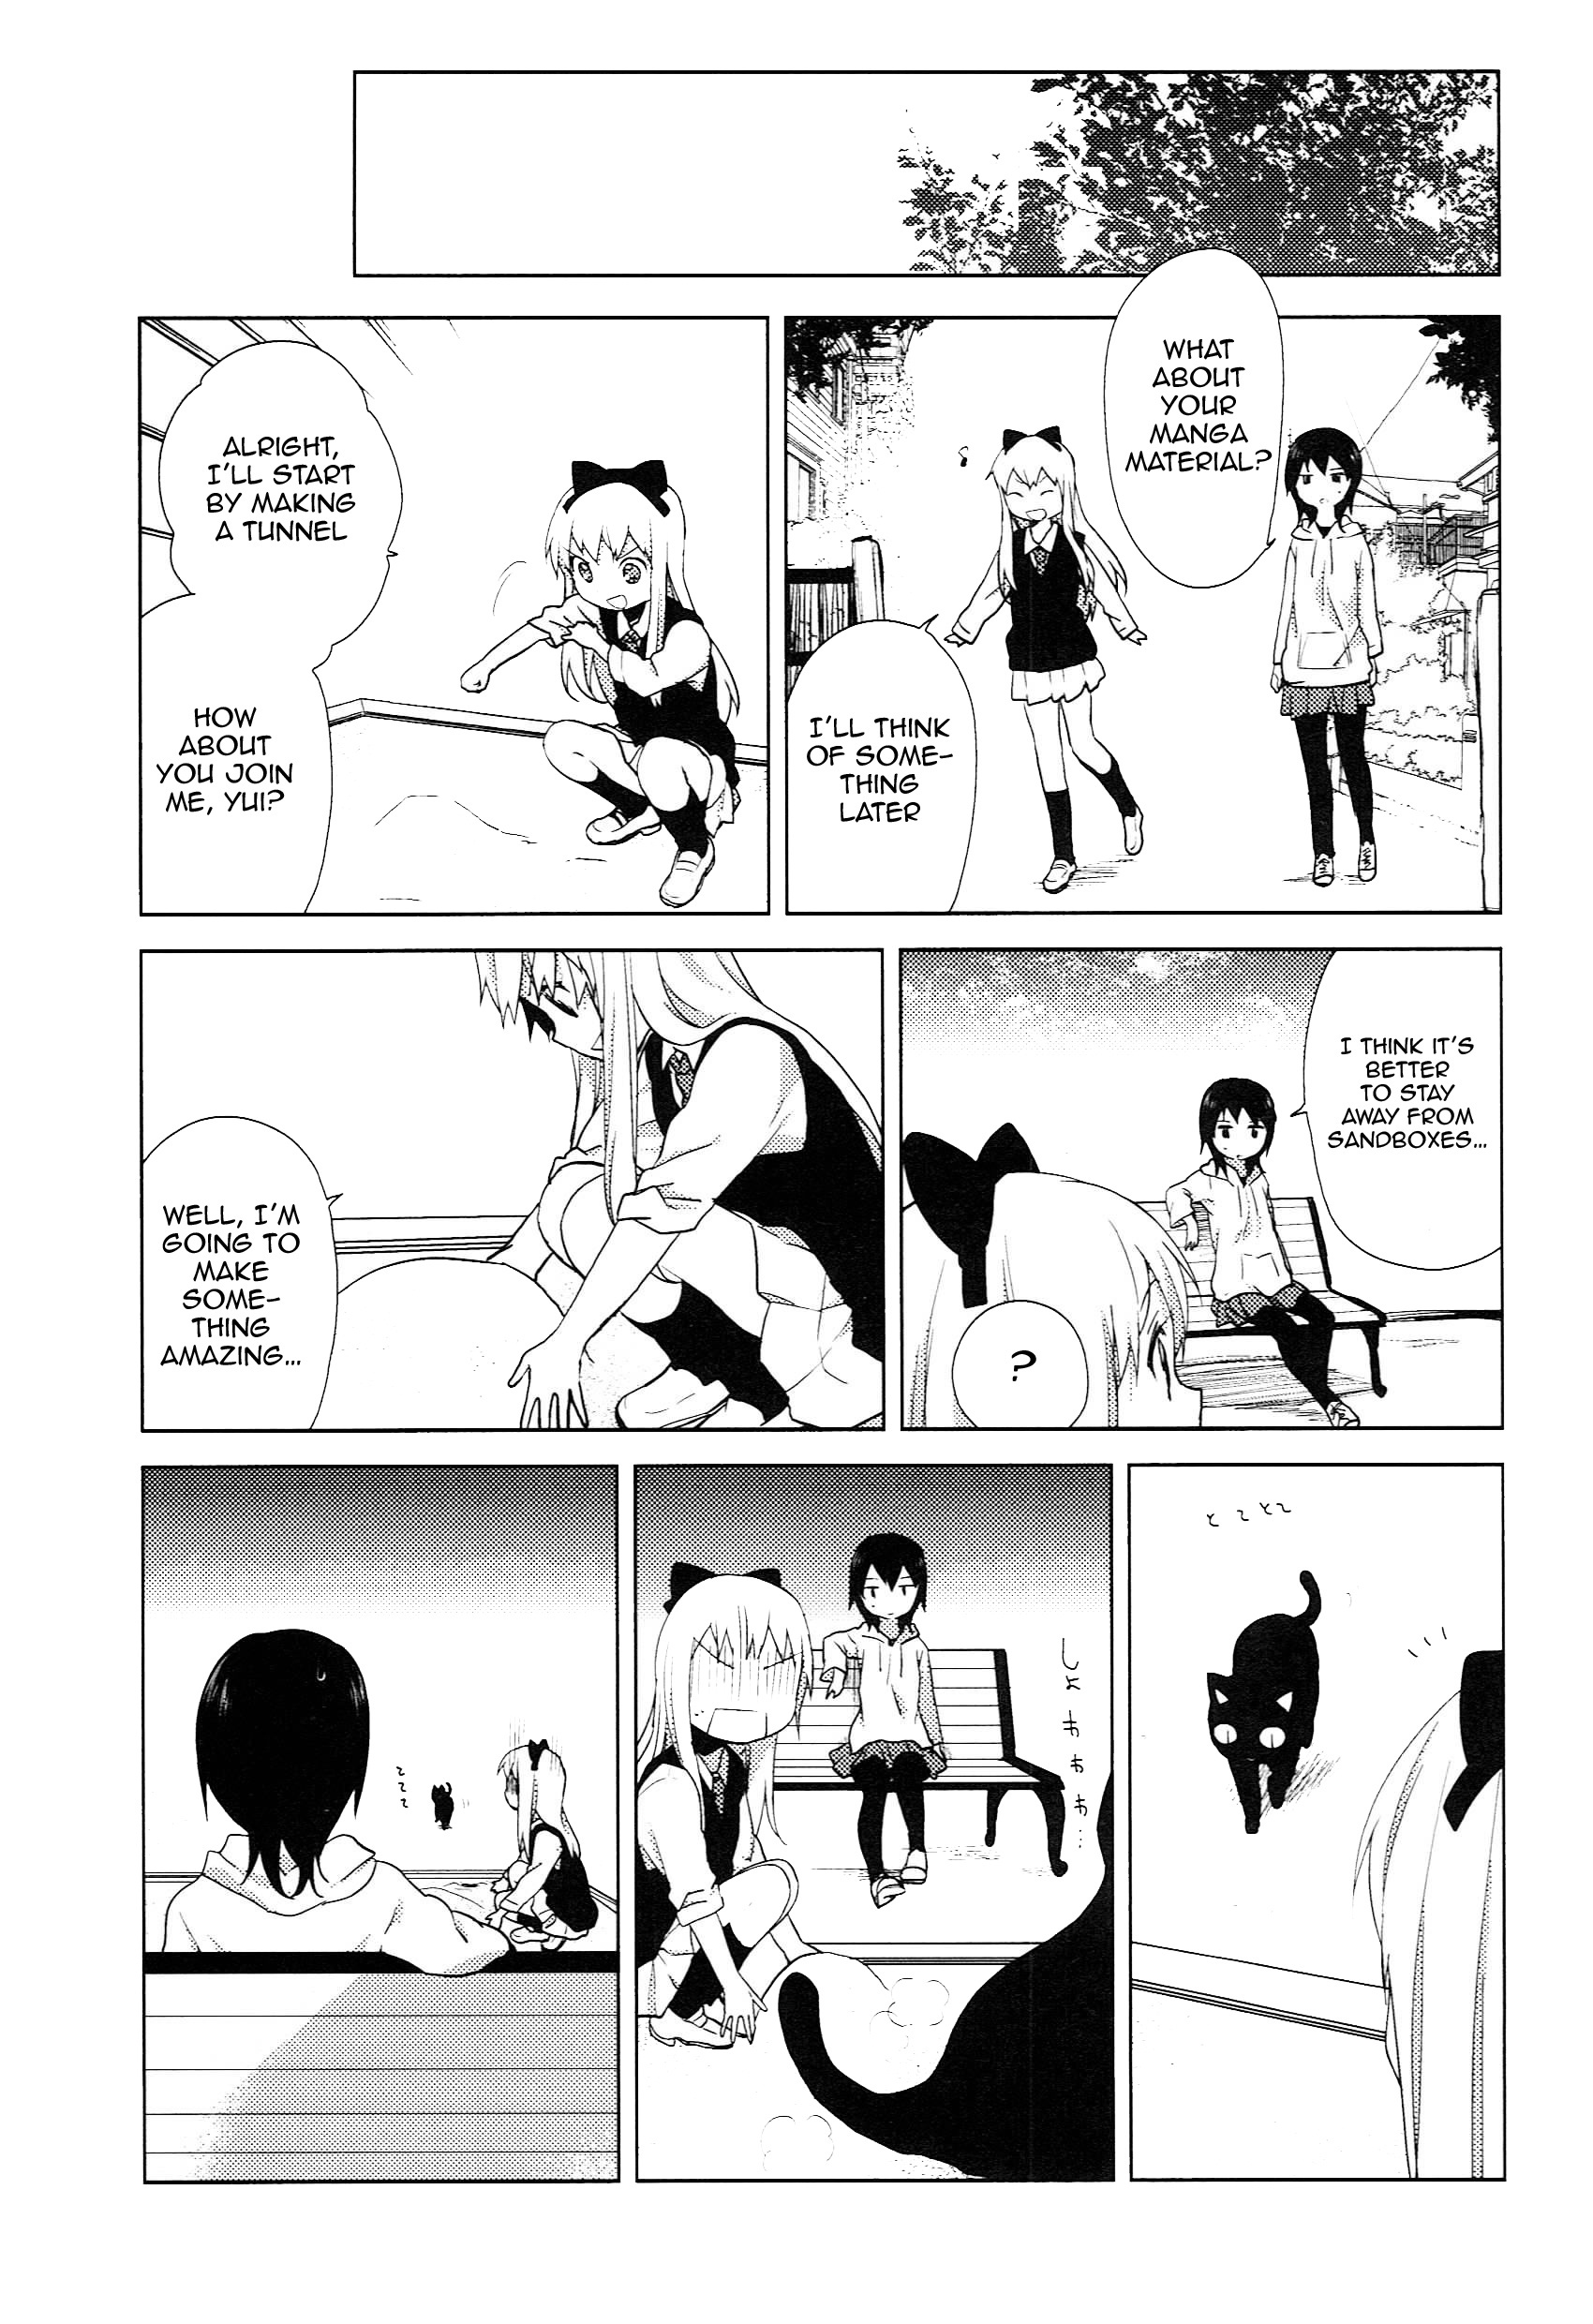 Yuru Yuri Vol.6 Chapter 51.08: Special 6 - The Room, The Final Boss, And I - Picture 3